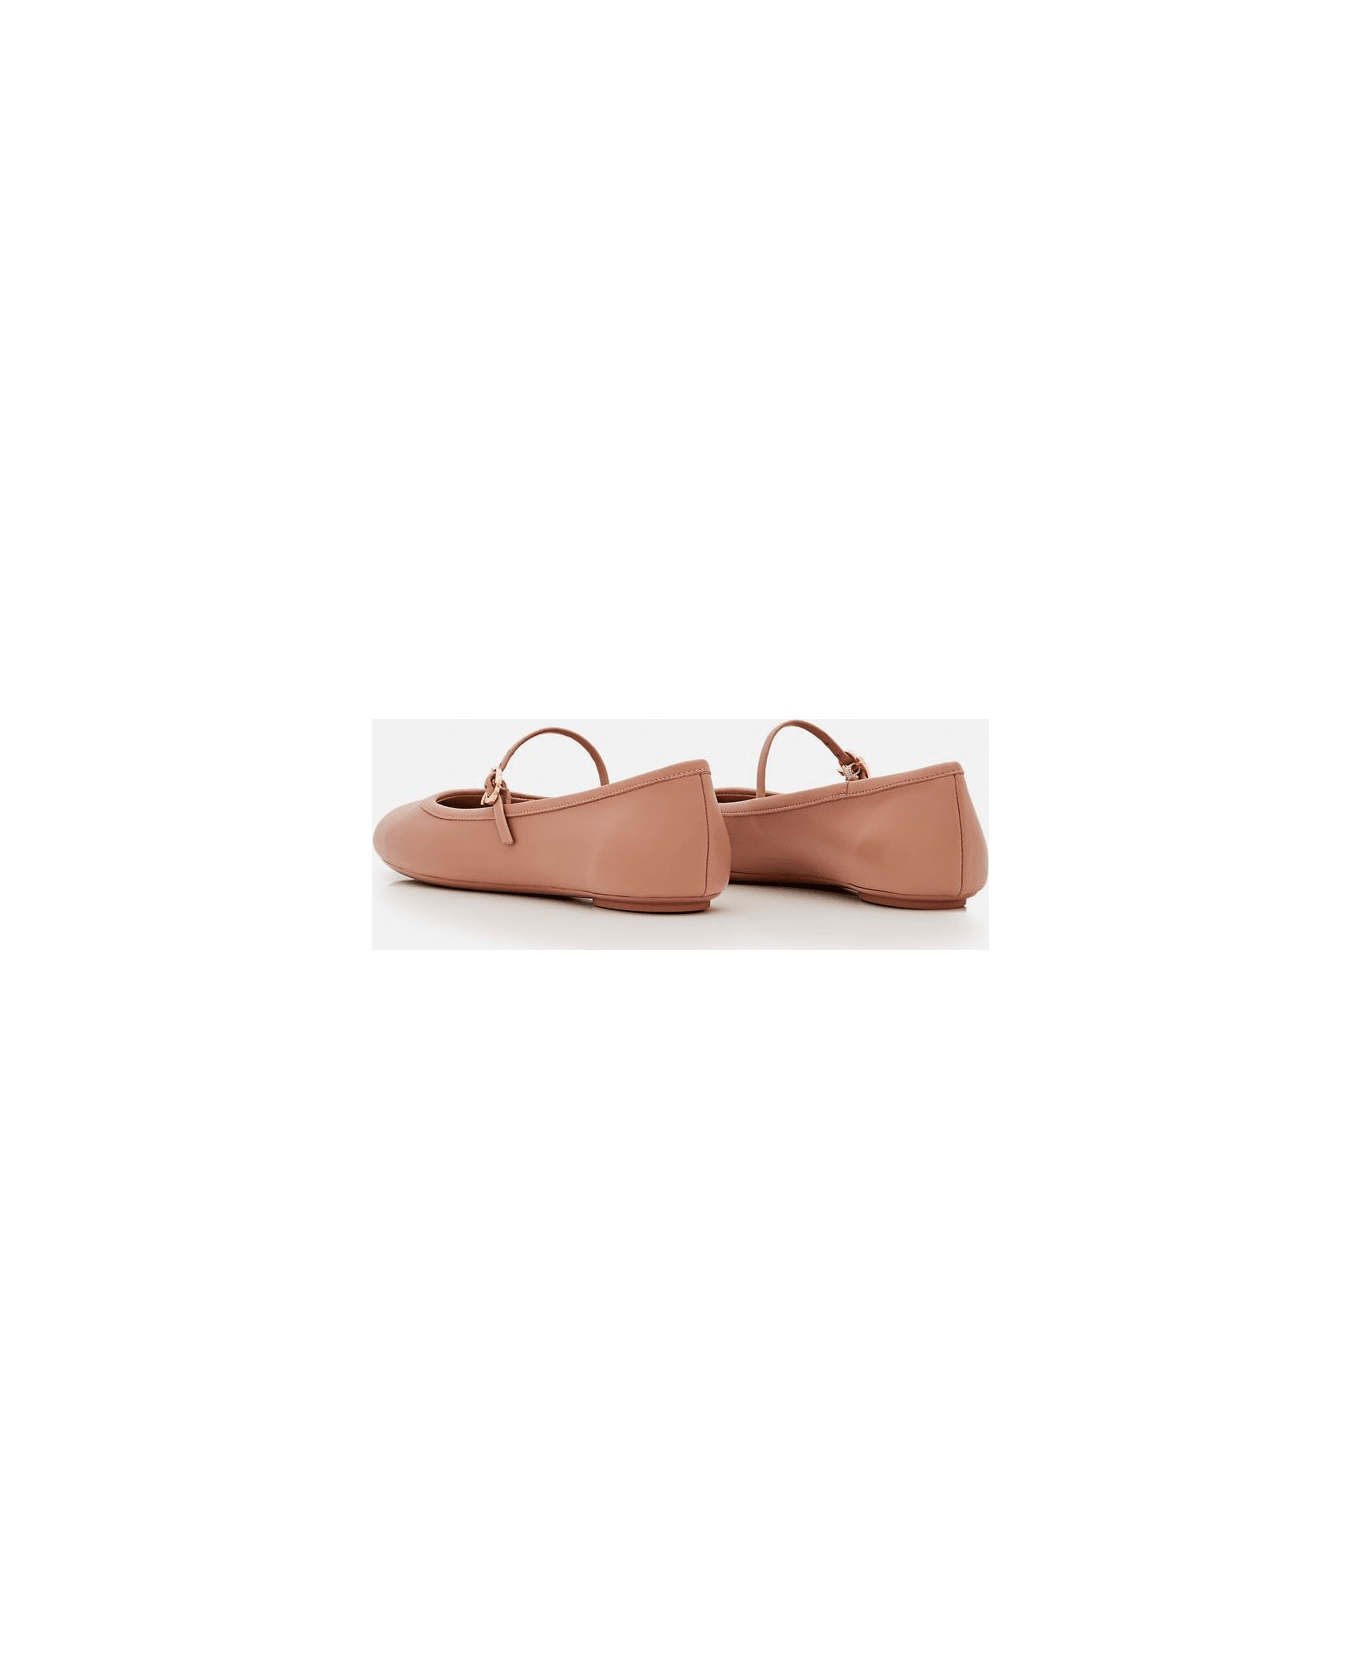 Gianvito Rossi Leather Ballet Flat - Rose